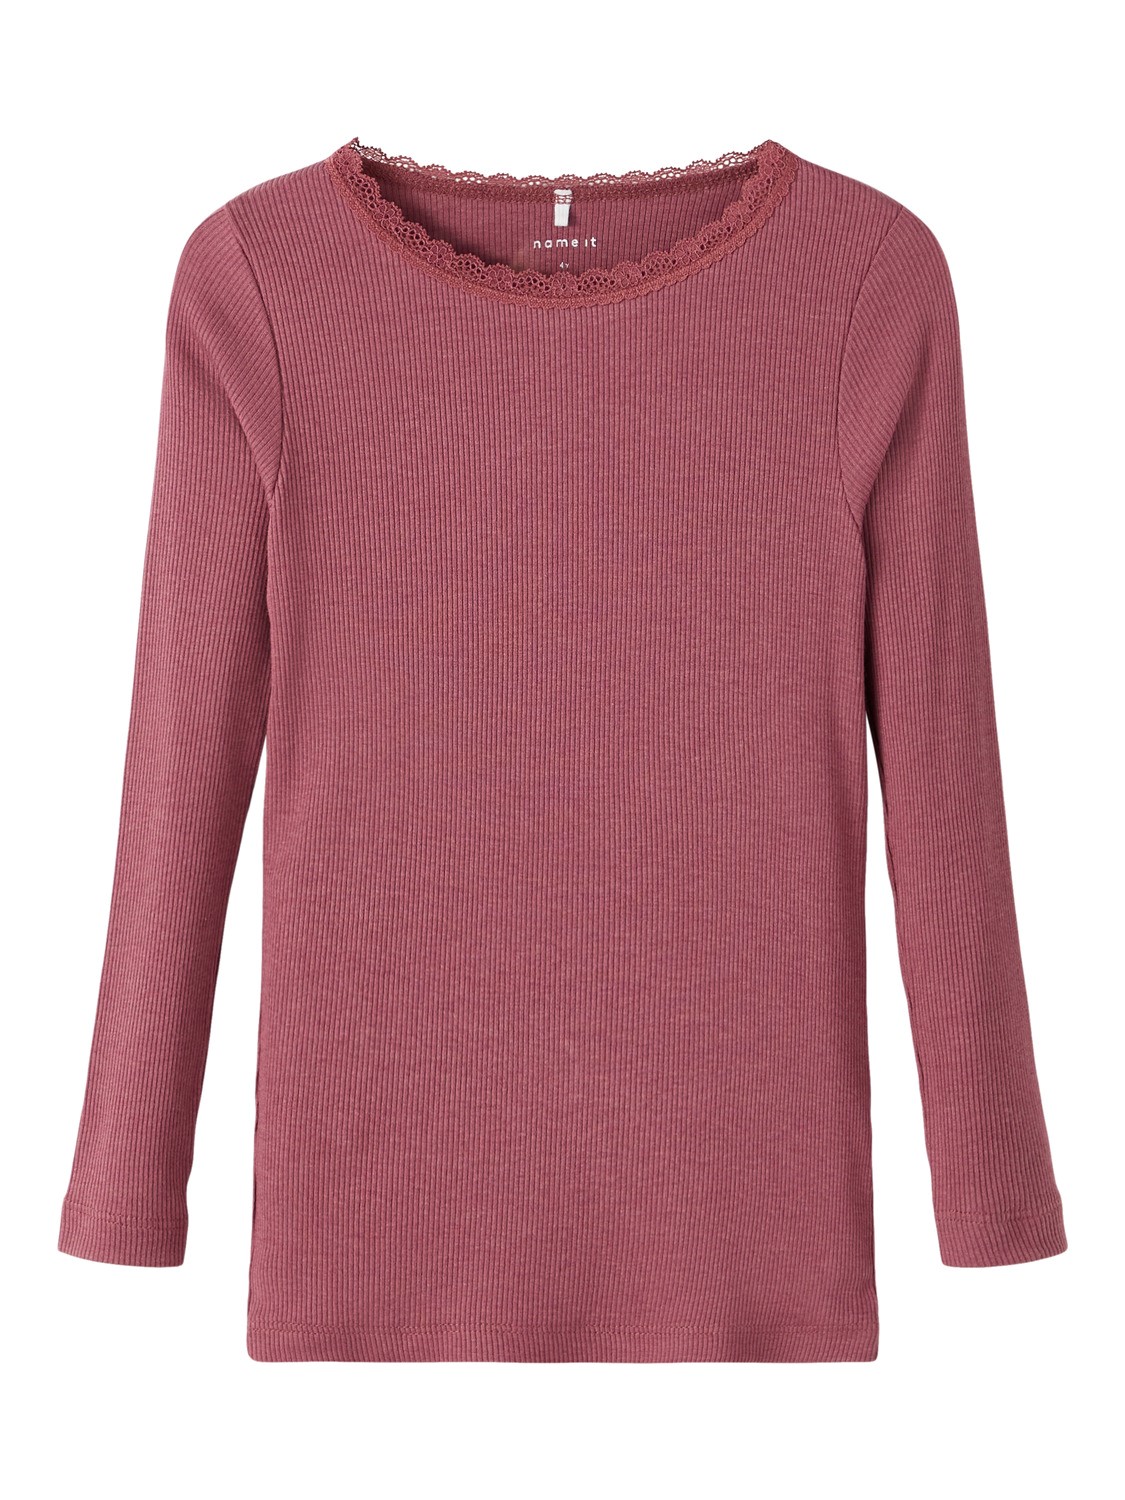 Kab Ls Top - Crushed Berry